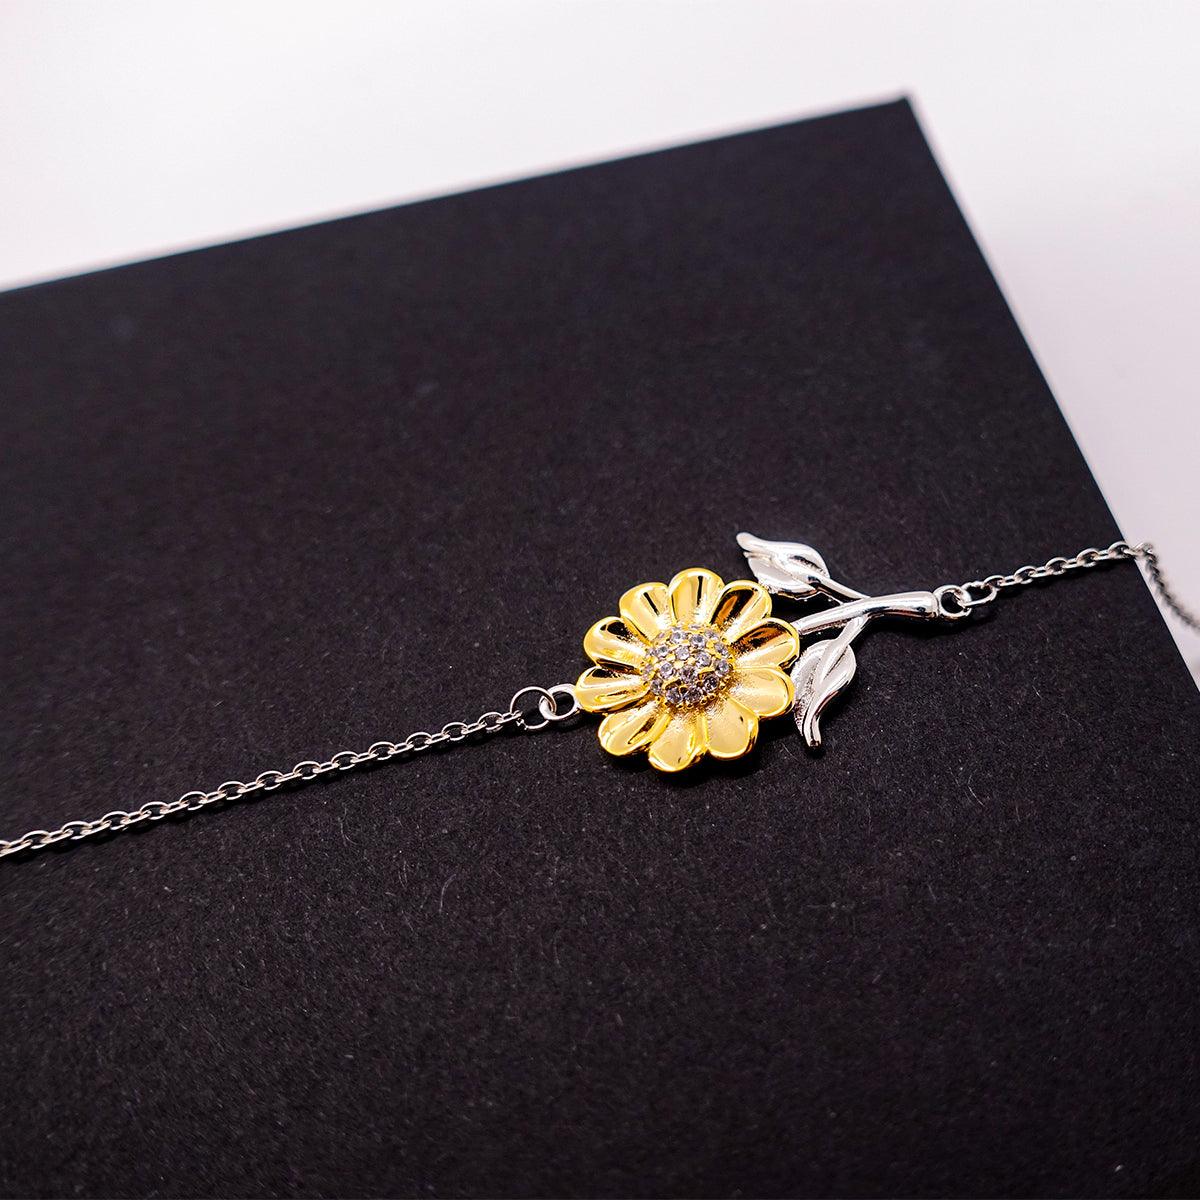 Psychologist Sunflower Bracelet - Thanks for being who you are - Birthday Christmas Jewelry Gifts Coworkers Colleague Boss - Mallard Moon Gift Shop